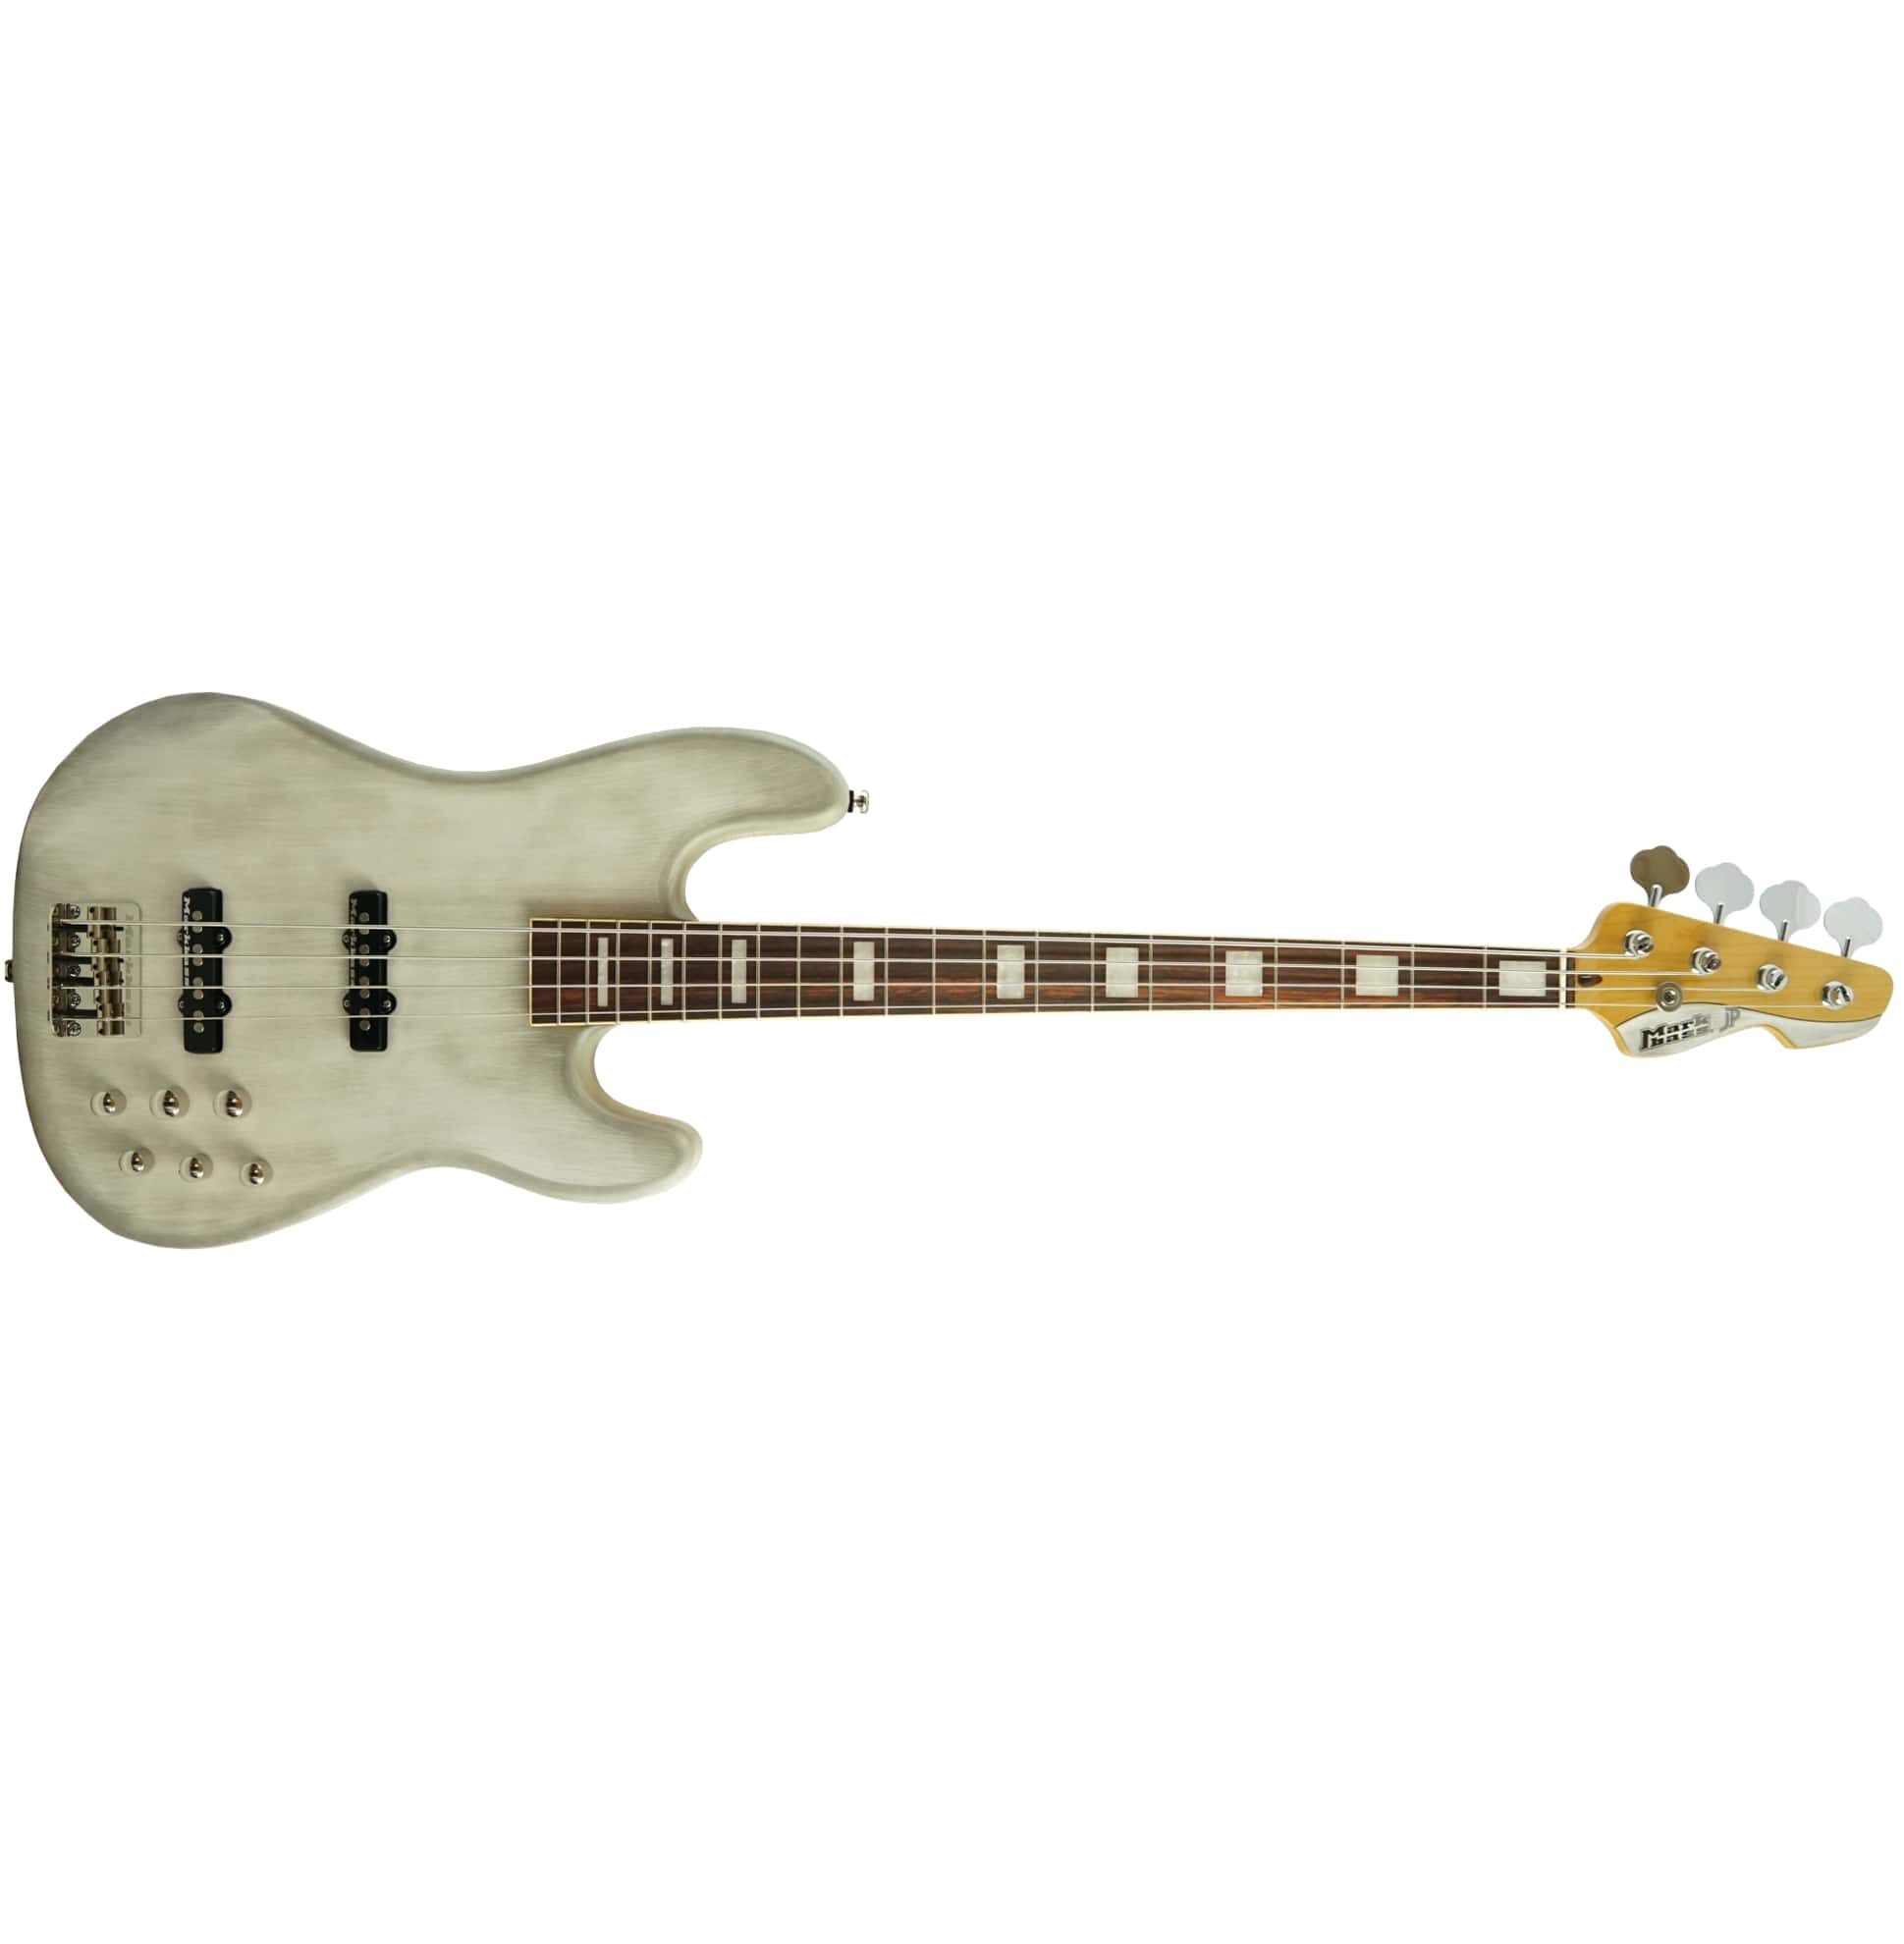 Markbass 4-String JF1 Series Rosewood Electric Bass With Bag, Old White MB-JF1-OLDWHITE-4-CR-RW